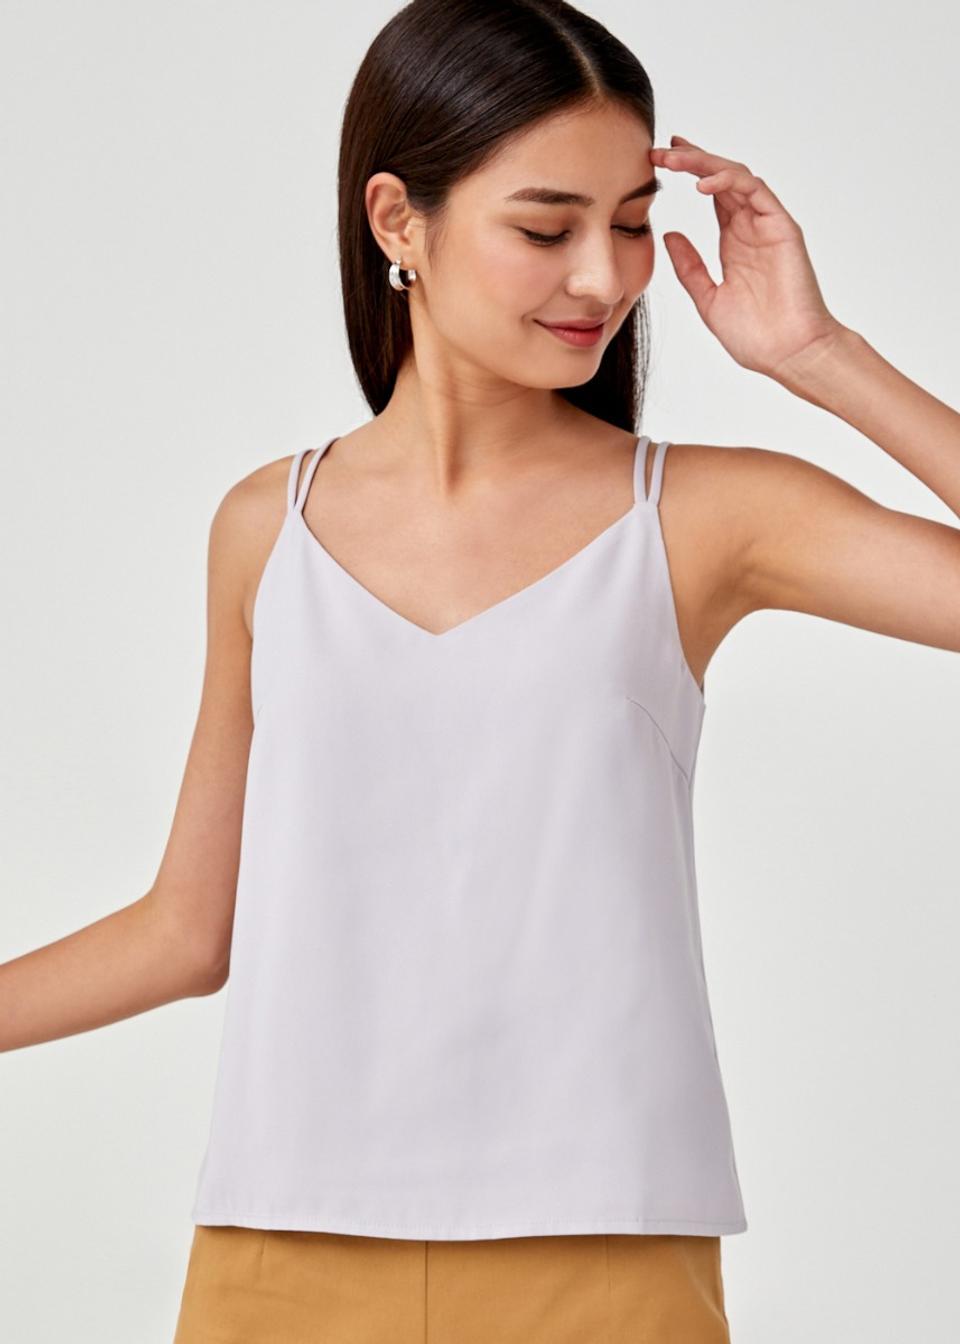 Naava Cross Back Camisole Top